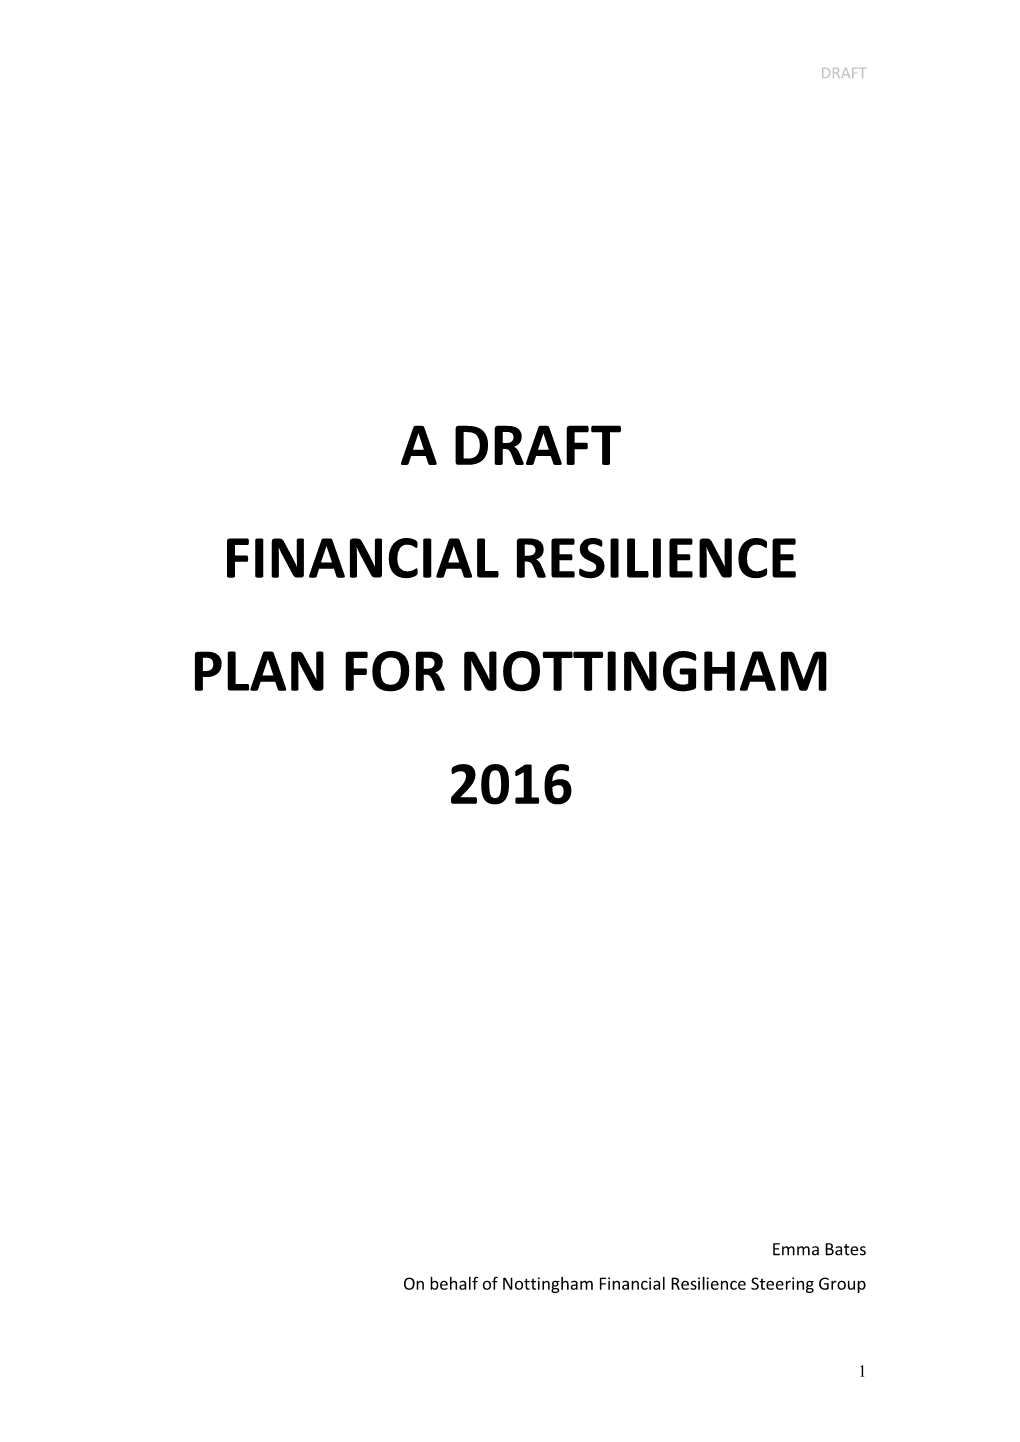 A Draft Financial Resilience Plan for Nottingham 2016